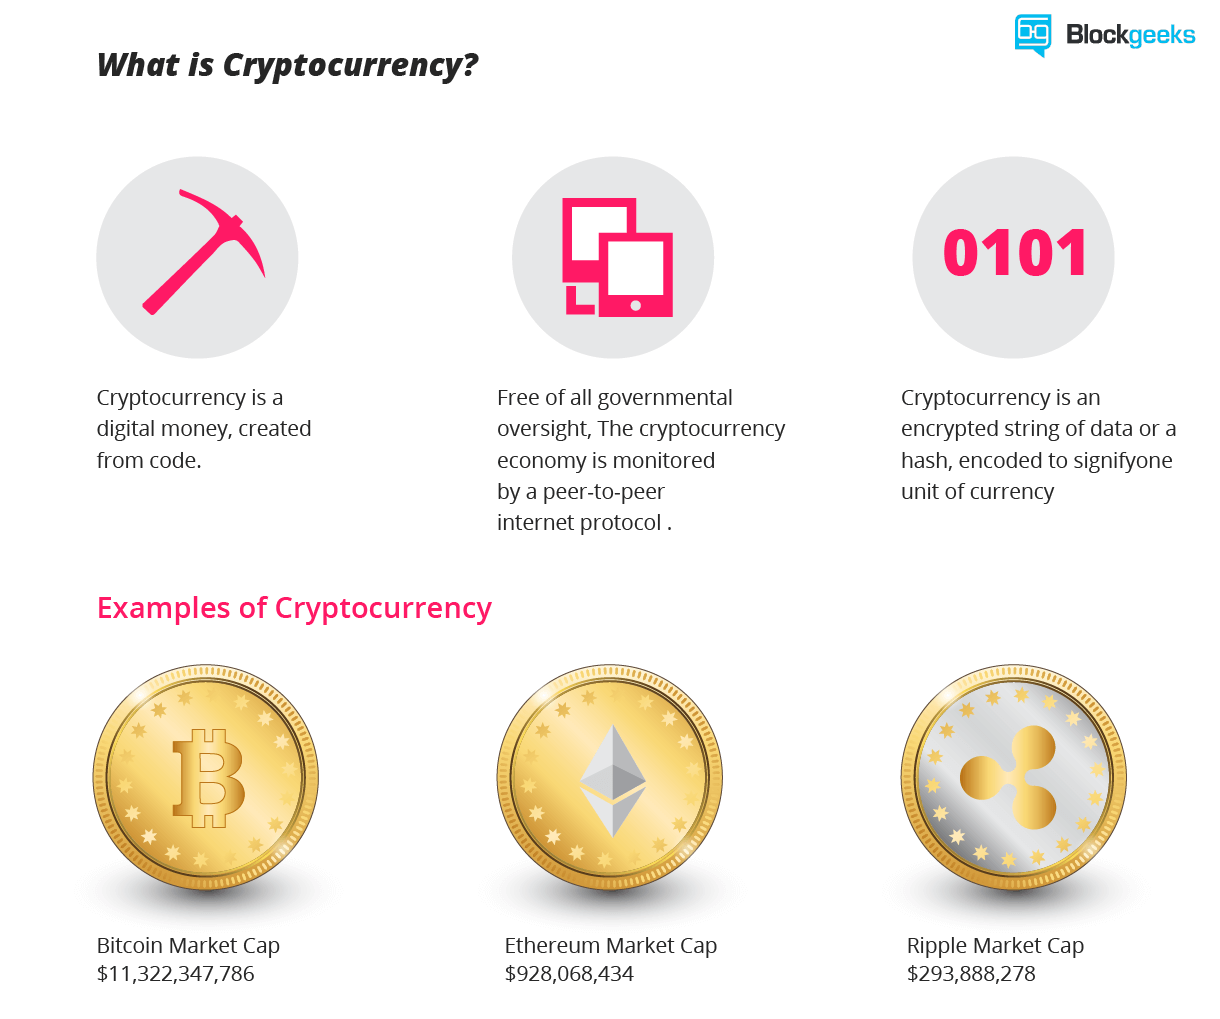 is there a cryptocoin that combines all cryptocurrencies